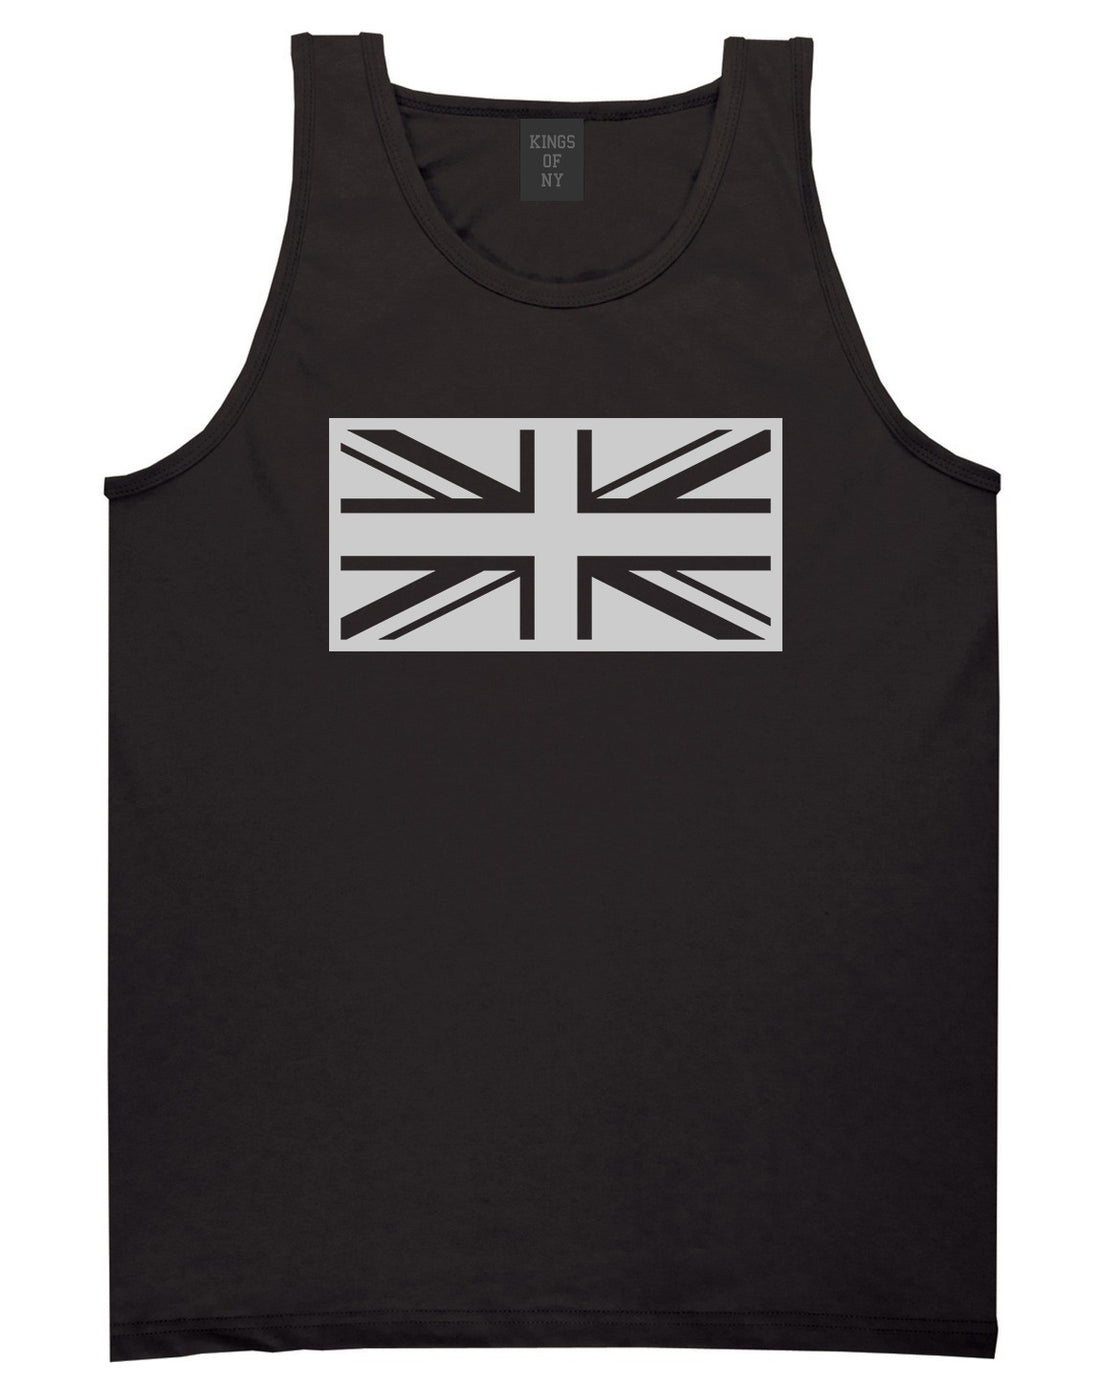 British Army Style Black Tank Top Shirt by Kings Of NY